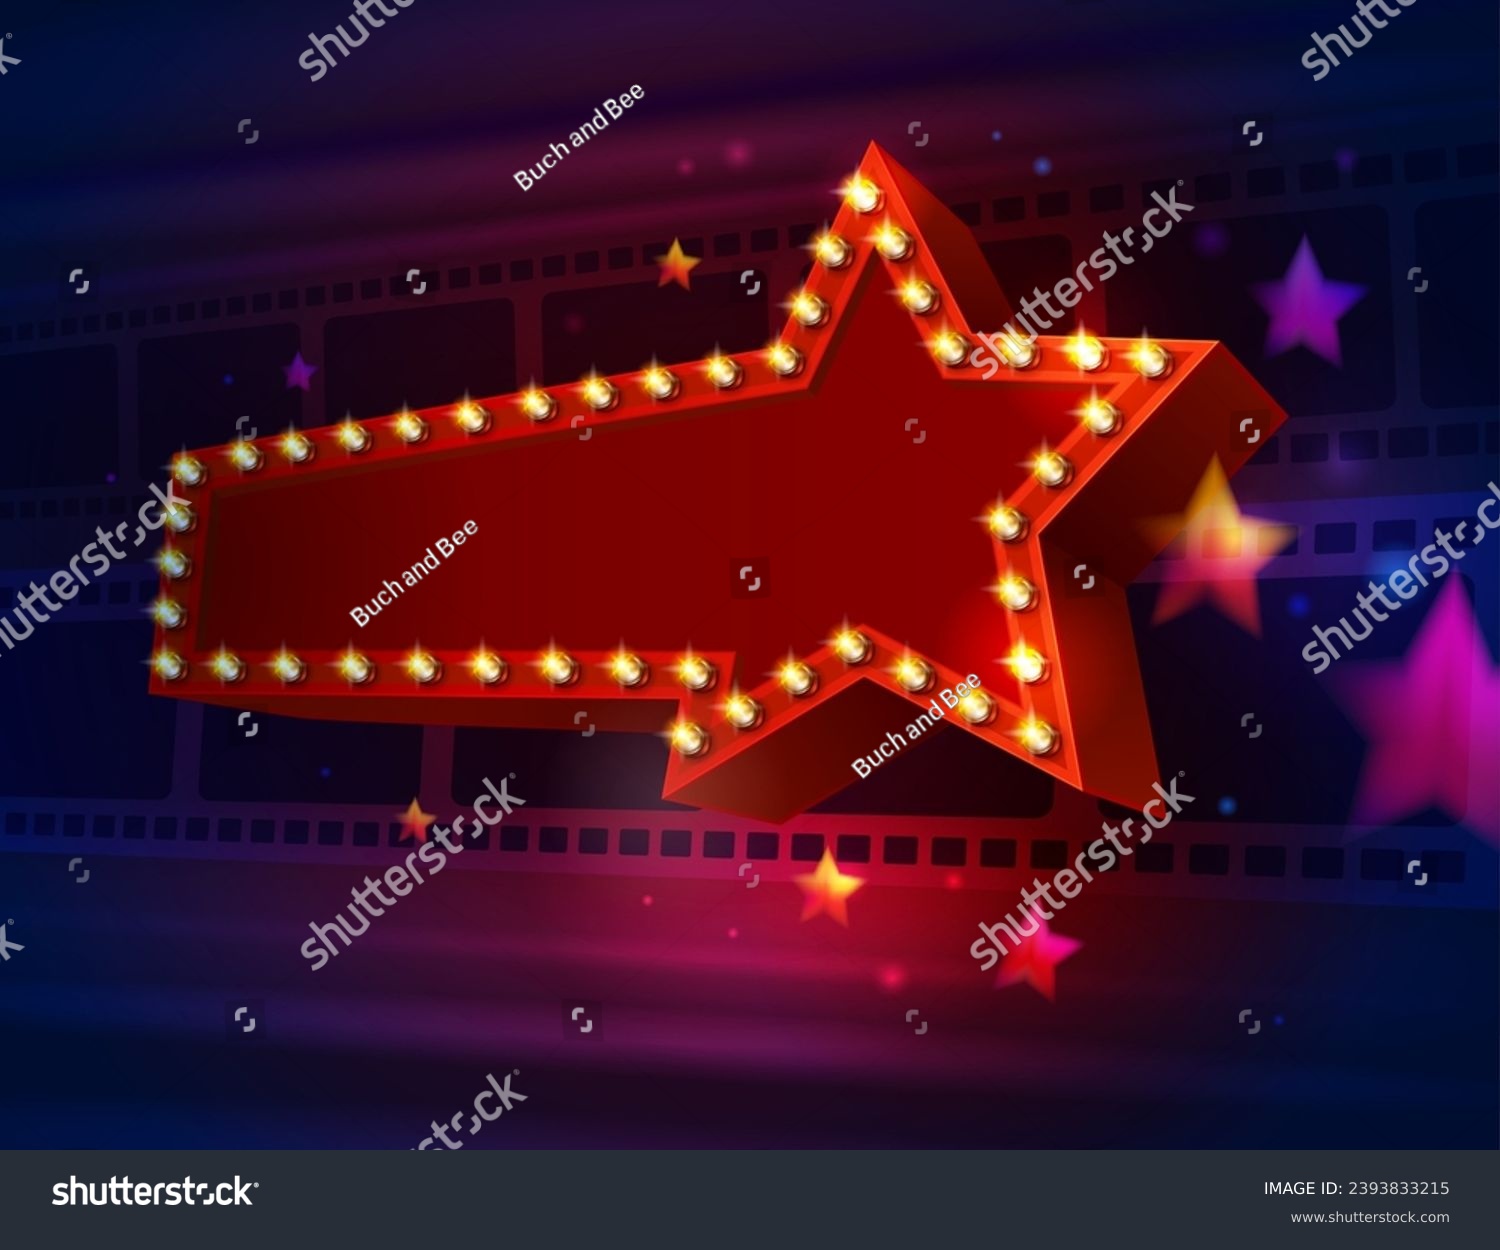 SVG of Movie cinema poster with neon star. Hollywood movie theater, blockbuster promo and Broadway show business realistic vector background or banner with cinema film, glowing bulb lights on star arrow svg